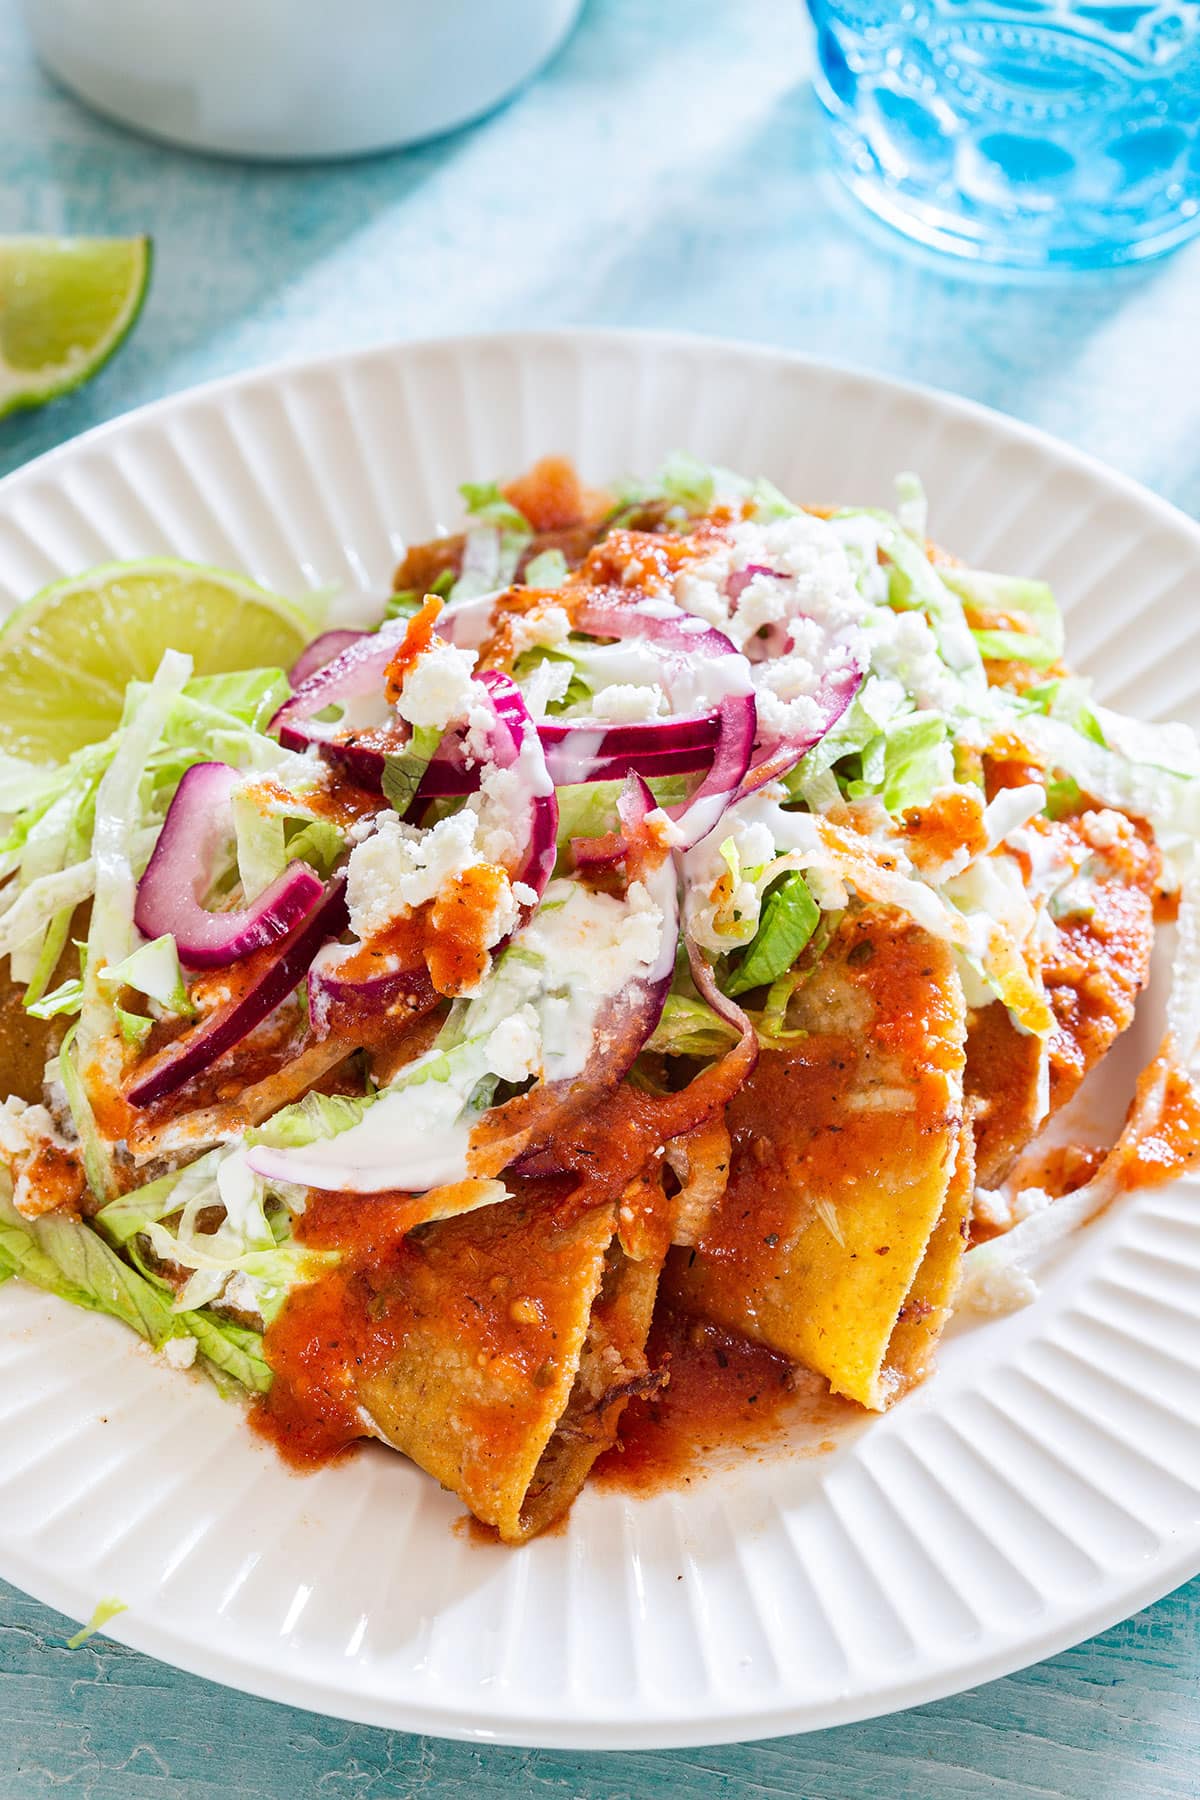 Deep fried tacos dorados served with lettuce, salsa, cheese, cream, and pickled onions.